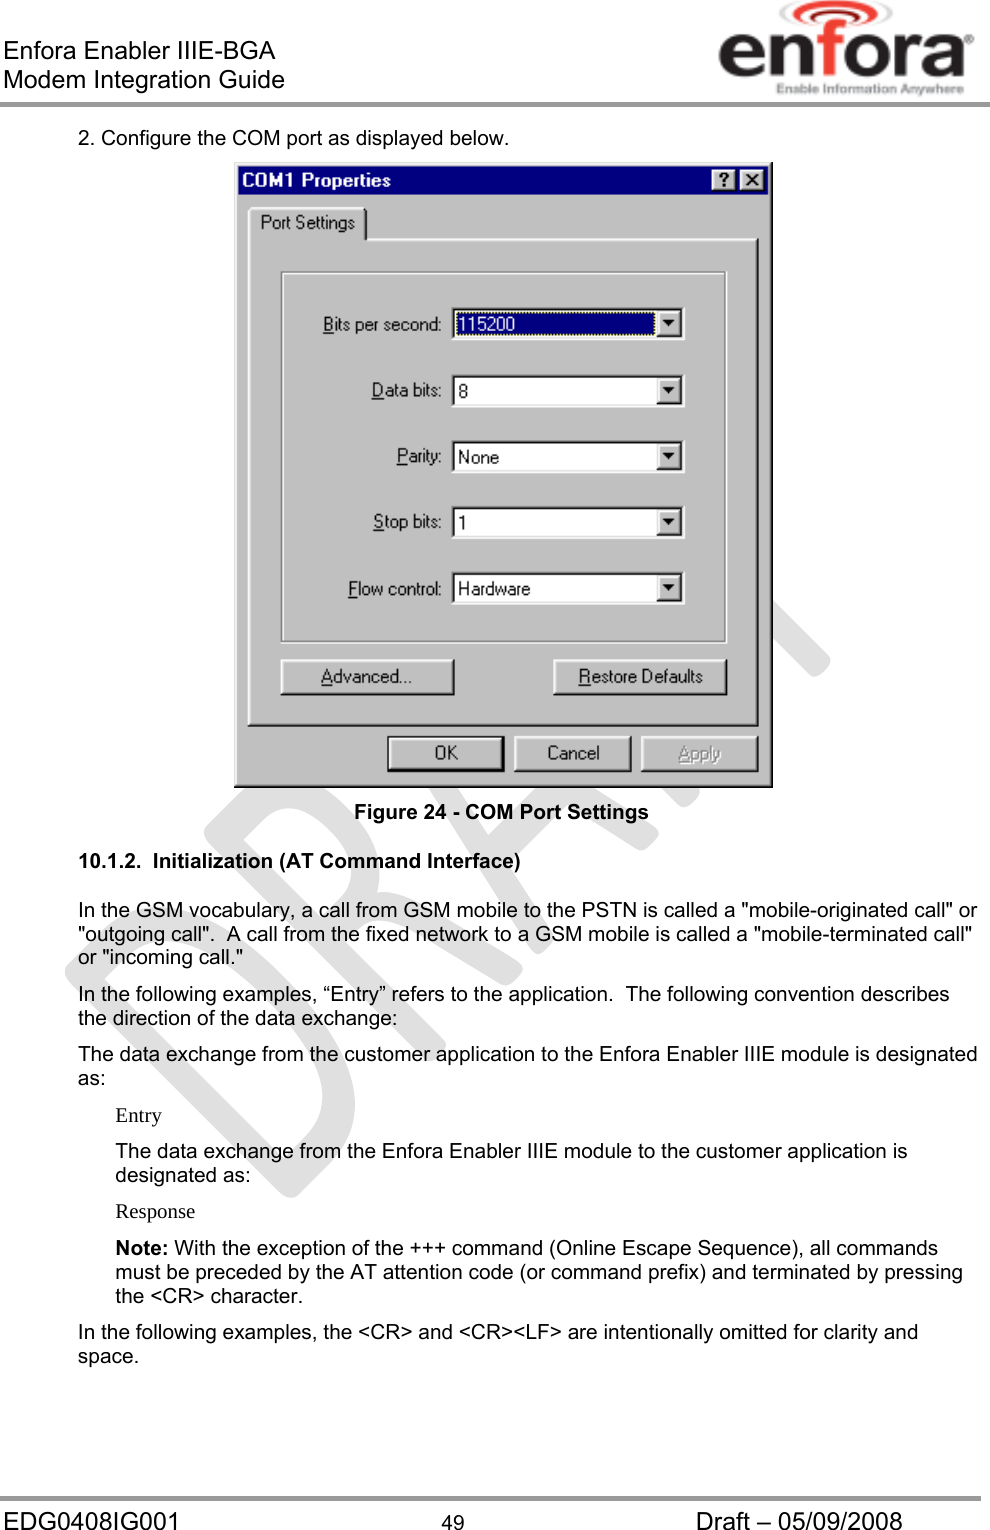 Enfora Enabler IIIE-BGA Modem Integration Guide EDG0408IG001  49  Draft – 05/09/2008 2. Configure the COM port as displayed below.  Figure 24 - COM Port Settings 10.1.2.  Initialization (AT Command Interface) In the GSM vocabulary, a call from GSM mobile to the PSTN is called a &quot;mobile-originated call&quot; or &quot;outgoing call&quot;.  A call from the fixed network to a GSM mobile is called a &quot;mobile-terminated call&quot; or &quot;incoming call.&quot; In the following examples, “Entry” refers to the application.  The following convention describes the direction of the data exchange: The data exchange from the customer application to the Enfora Enabler IIIE module is designated as: Entry The data exchange from the Enfora Enabler IIIE module to the customer application is designated as: Response Note: With the exception of the +++ command (Online Escape Sequence), all commands must be preceded by the AT attention code (or command prefix) and terminated by pressing the &lt;CR&gt; character. In the following examples, the &lt;CR&gt; and &lt;CR&gt;&lt;LF&gt; are intentionally omitted for clarity and space. 